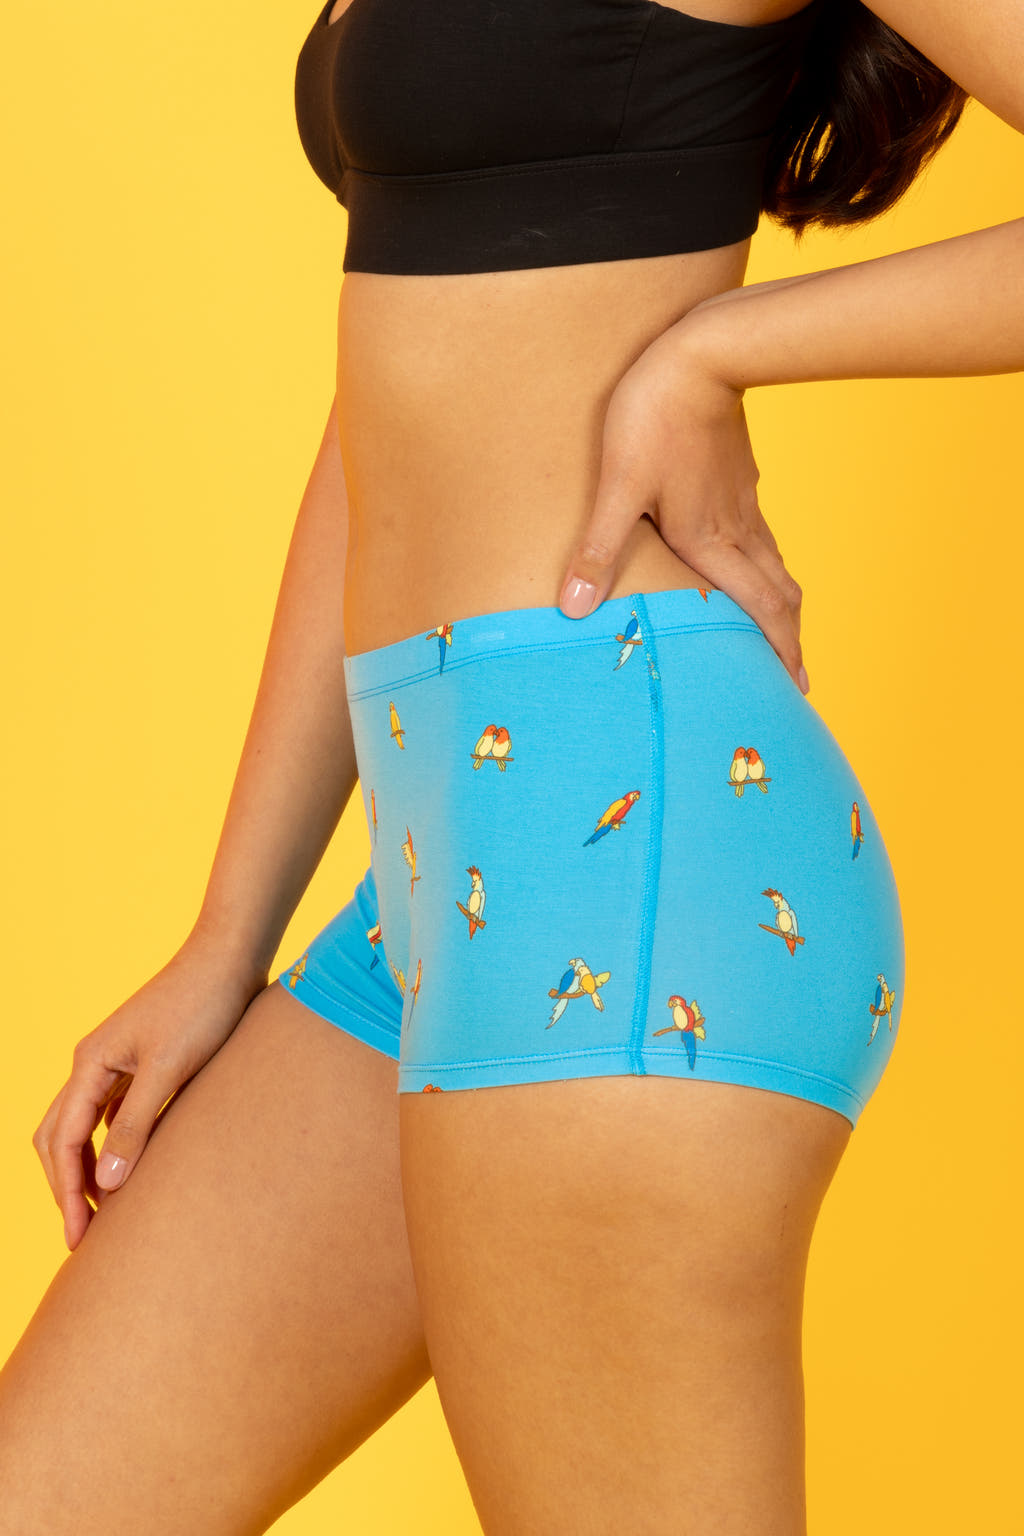 A whimsical pair of Parrot Modal Boyshort Underwear, featuring charming bird designs. From Shinesty, where fun and outlandish clothing reign supreme.